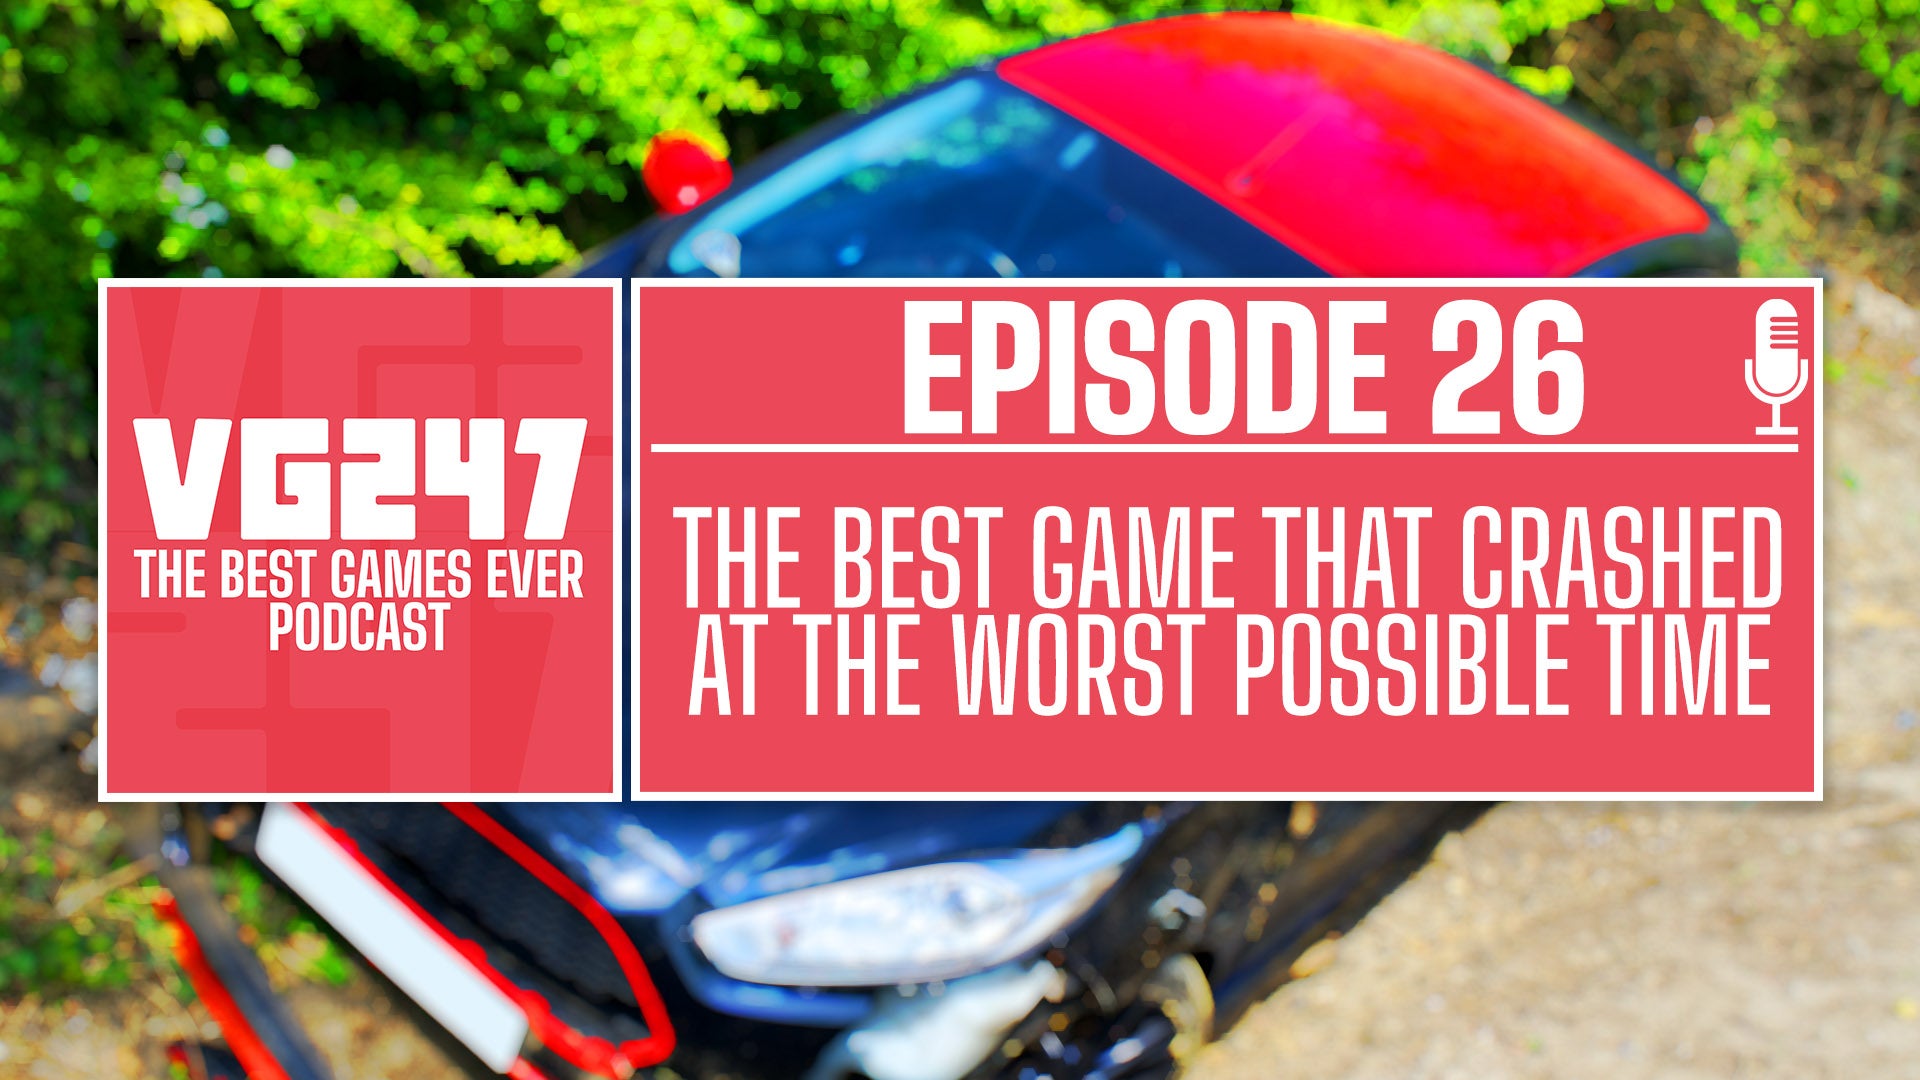 VG247’s The Best Games Ever Podcast – Ep.26: The best game that crashed at the worst possible time